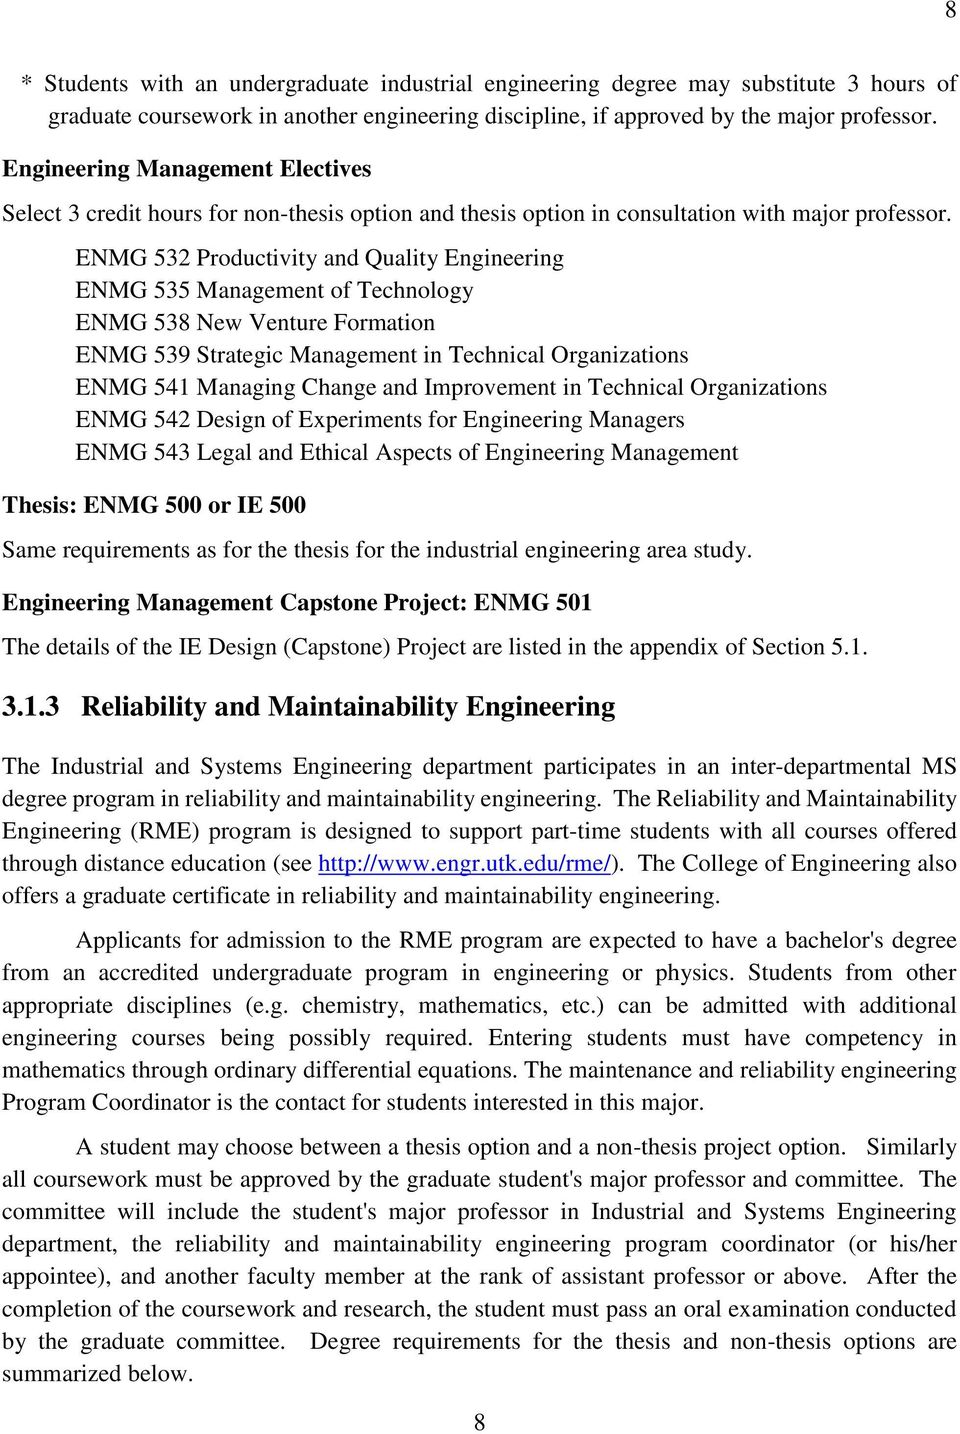 ENMG 532 Productivity and Quality Engineering ENMG 535 Management of Technology ENMG 538 New Venture Formation ENMG 539 Strategic Management in Technical Organizations ENMG 541 Managing Change and